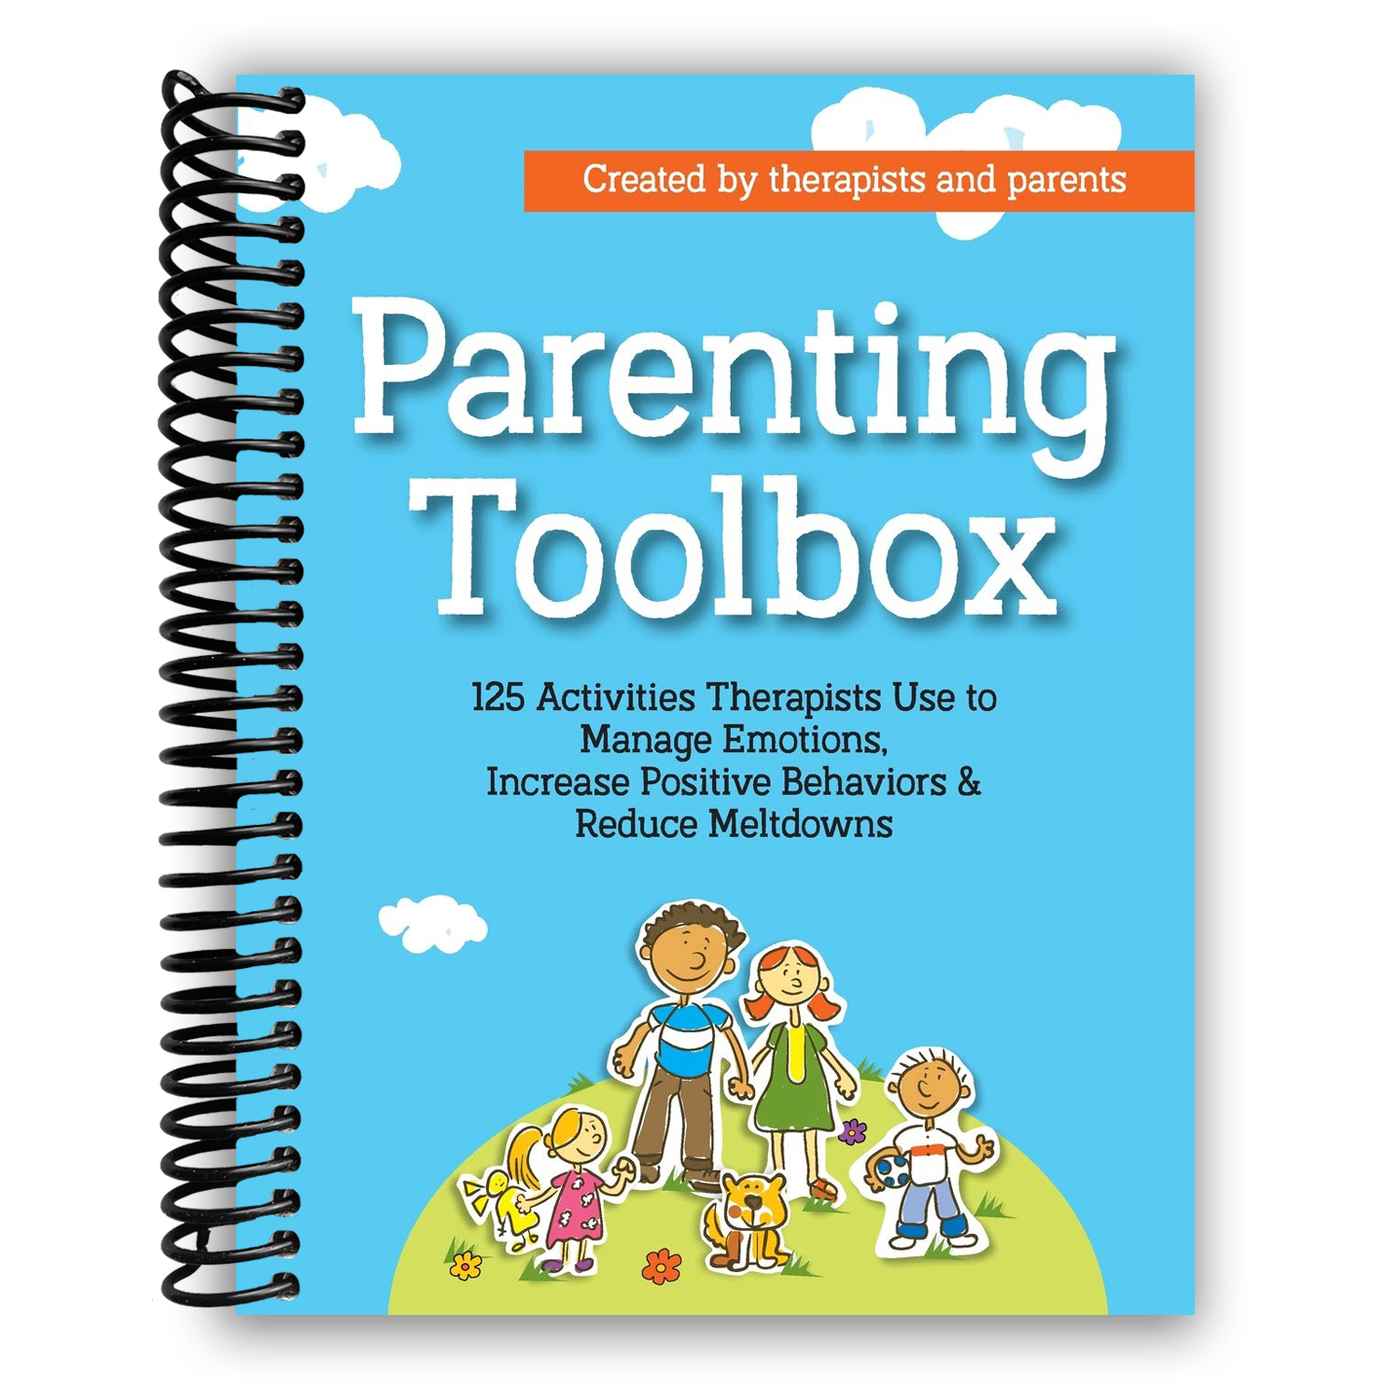 Parenting Toolbox: 125 Activities Therapists Use to Reduce Meltdowns, Increase Positive Behaviors & Manage Emotions(Spiral Bound)